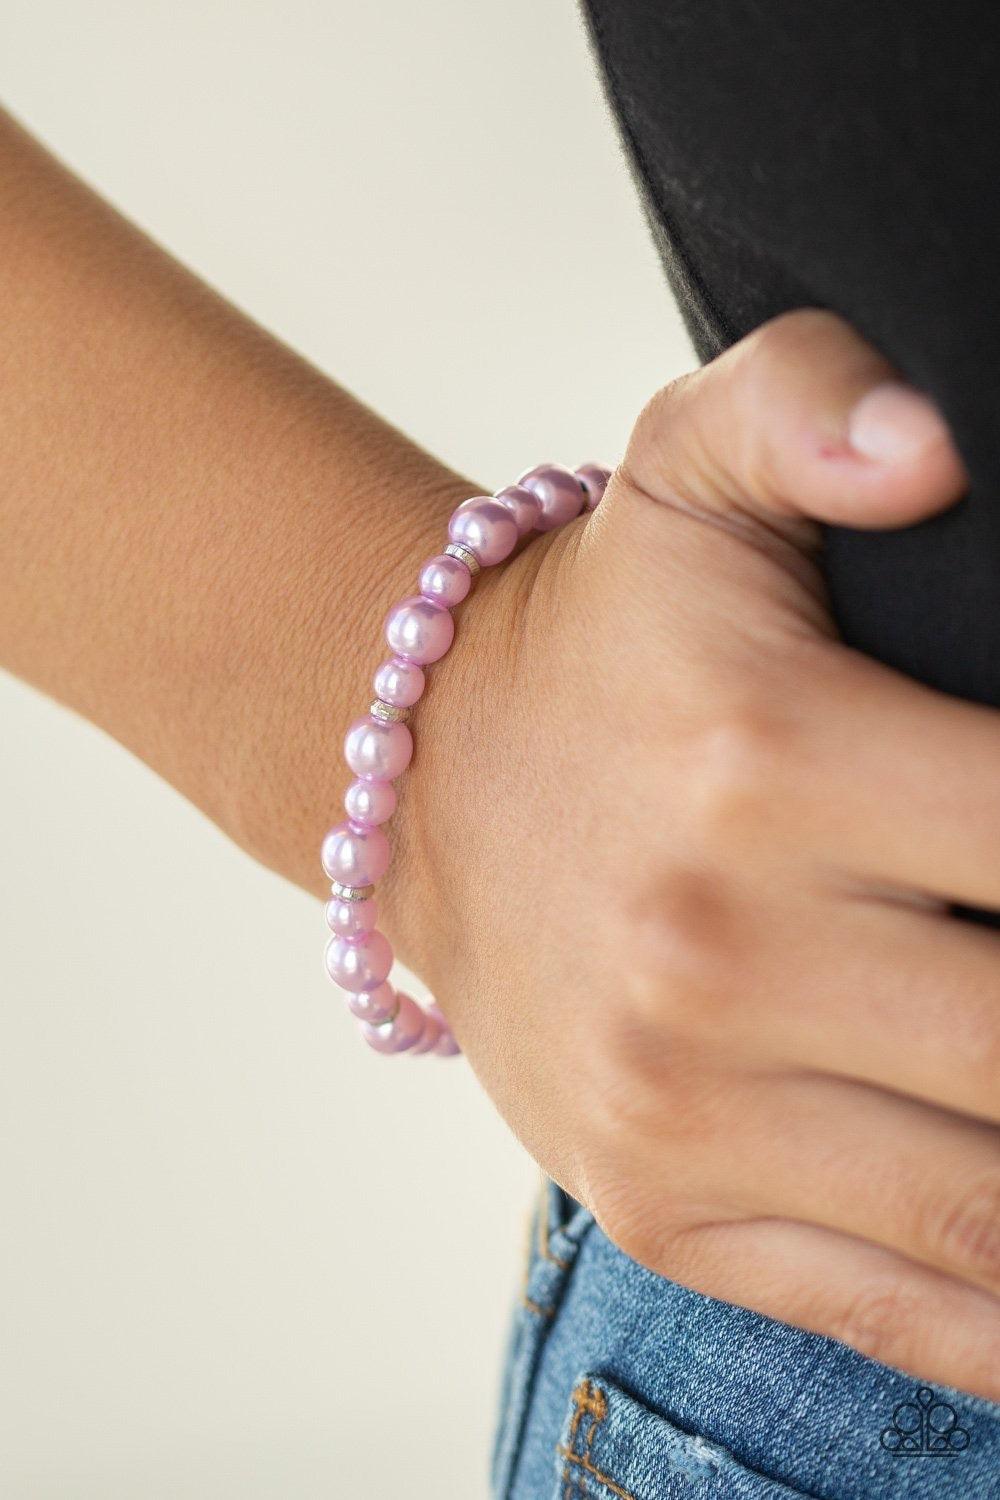 Paparazzi Accessories Powder and Pearls - Purple Infused with dainty silver accents, a collection of dainty and classic purple pearls are threaded along a stretchy band around the wrist for a timeless look. Jewelry